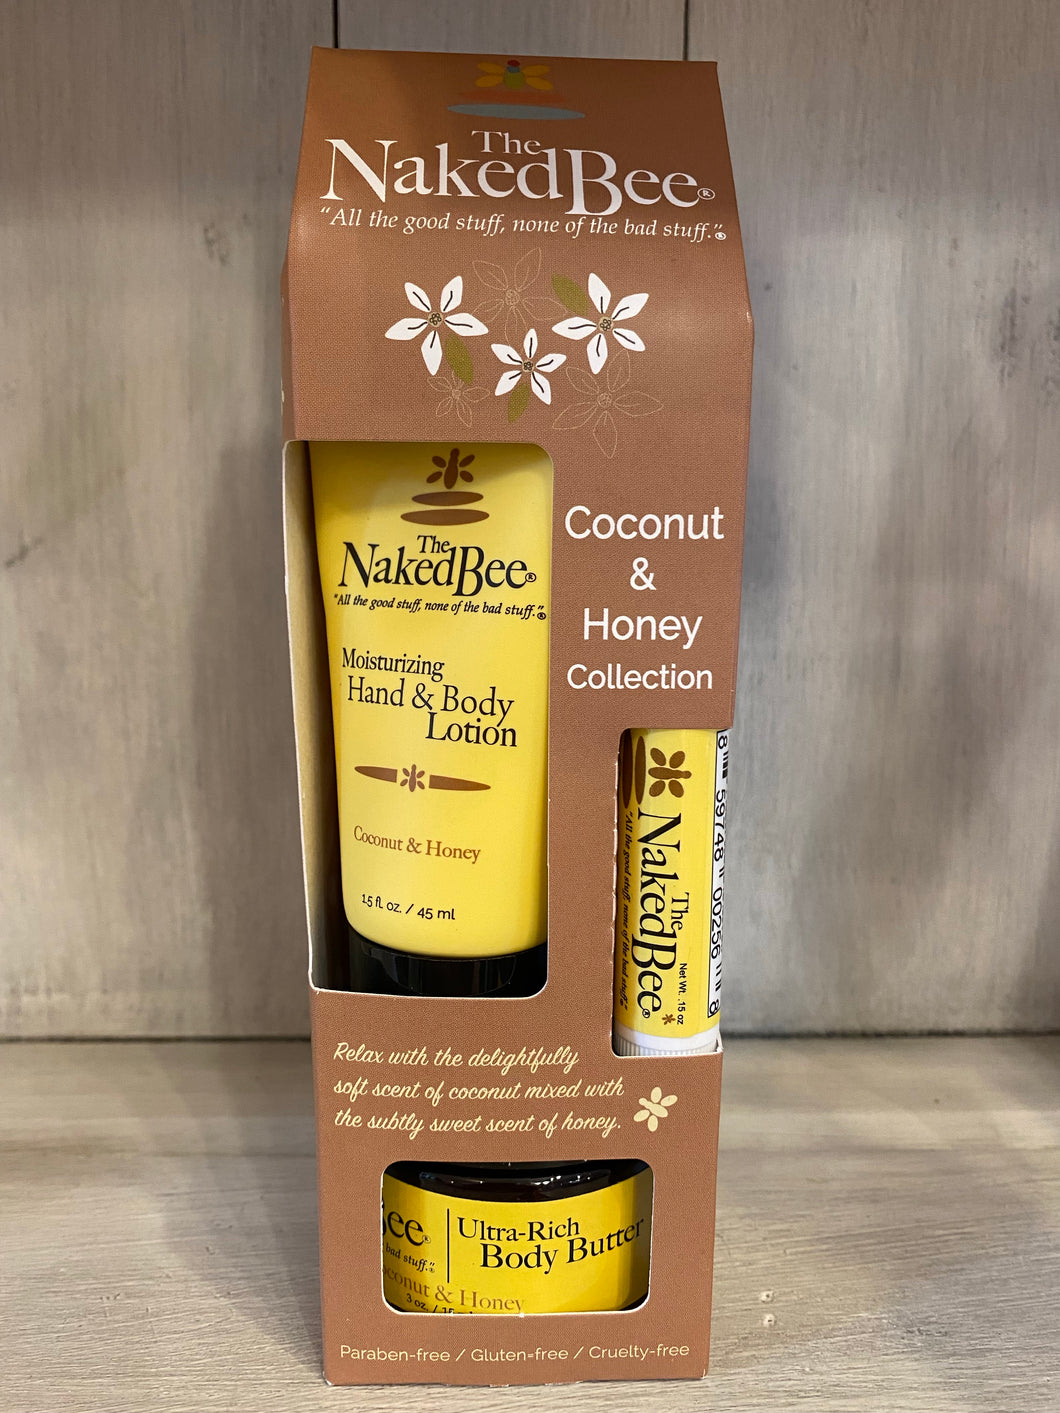 The Naked Bee Coconut and Honey Gift Set